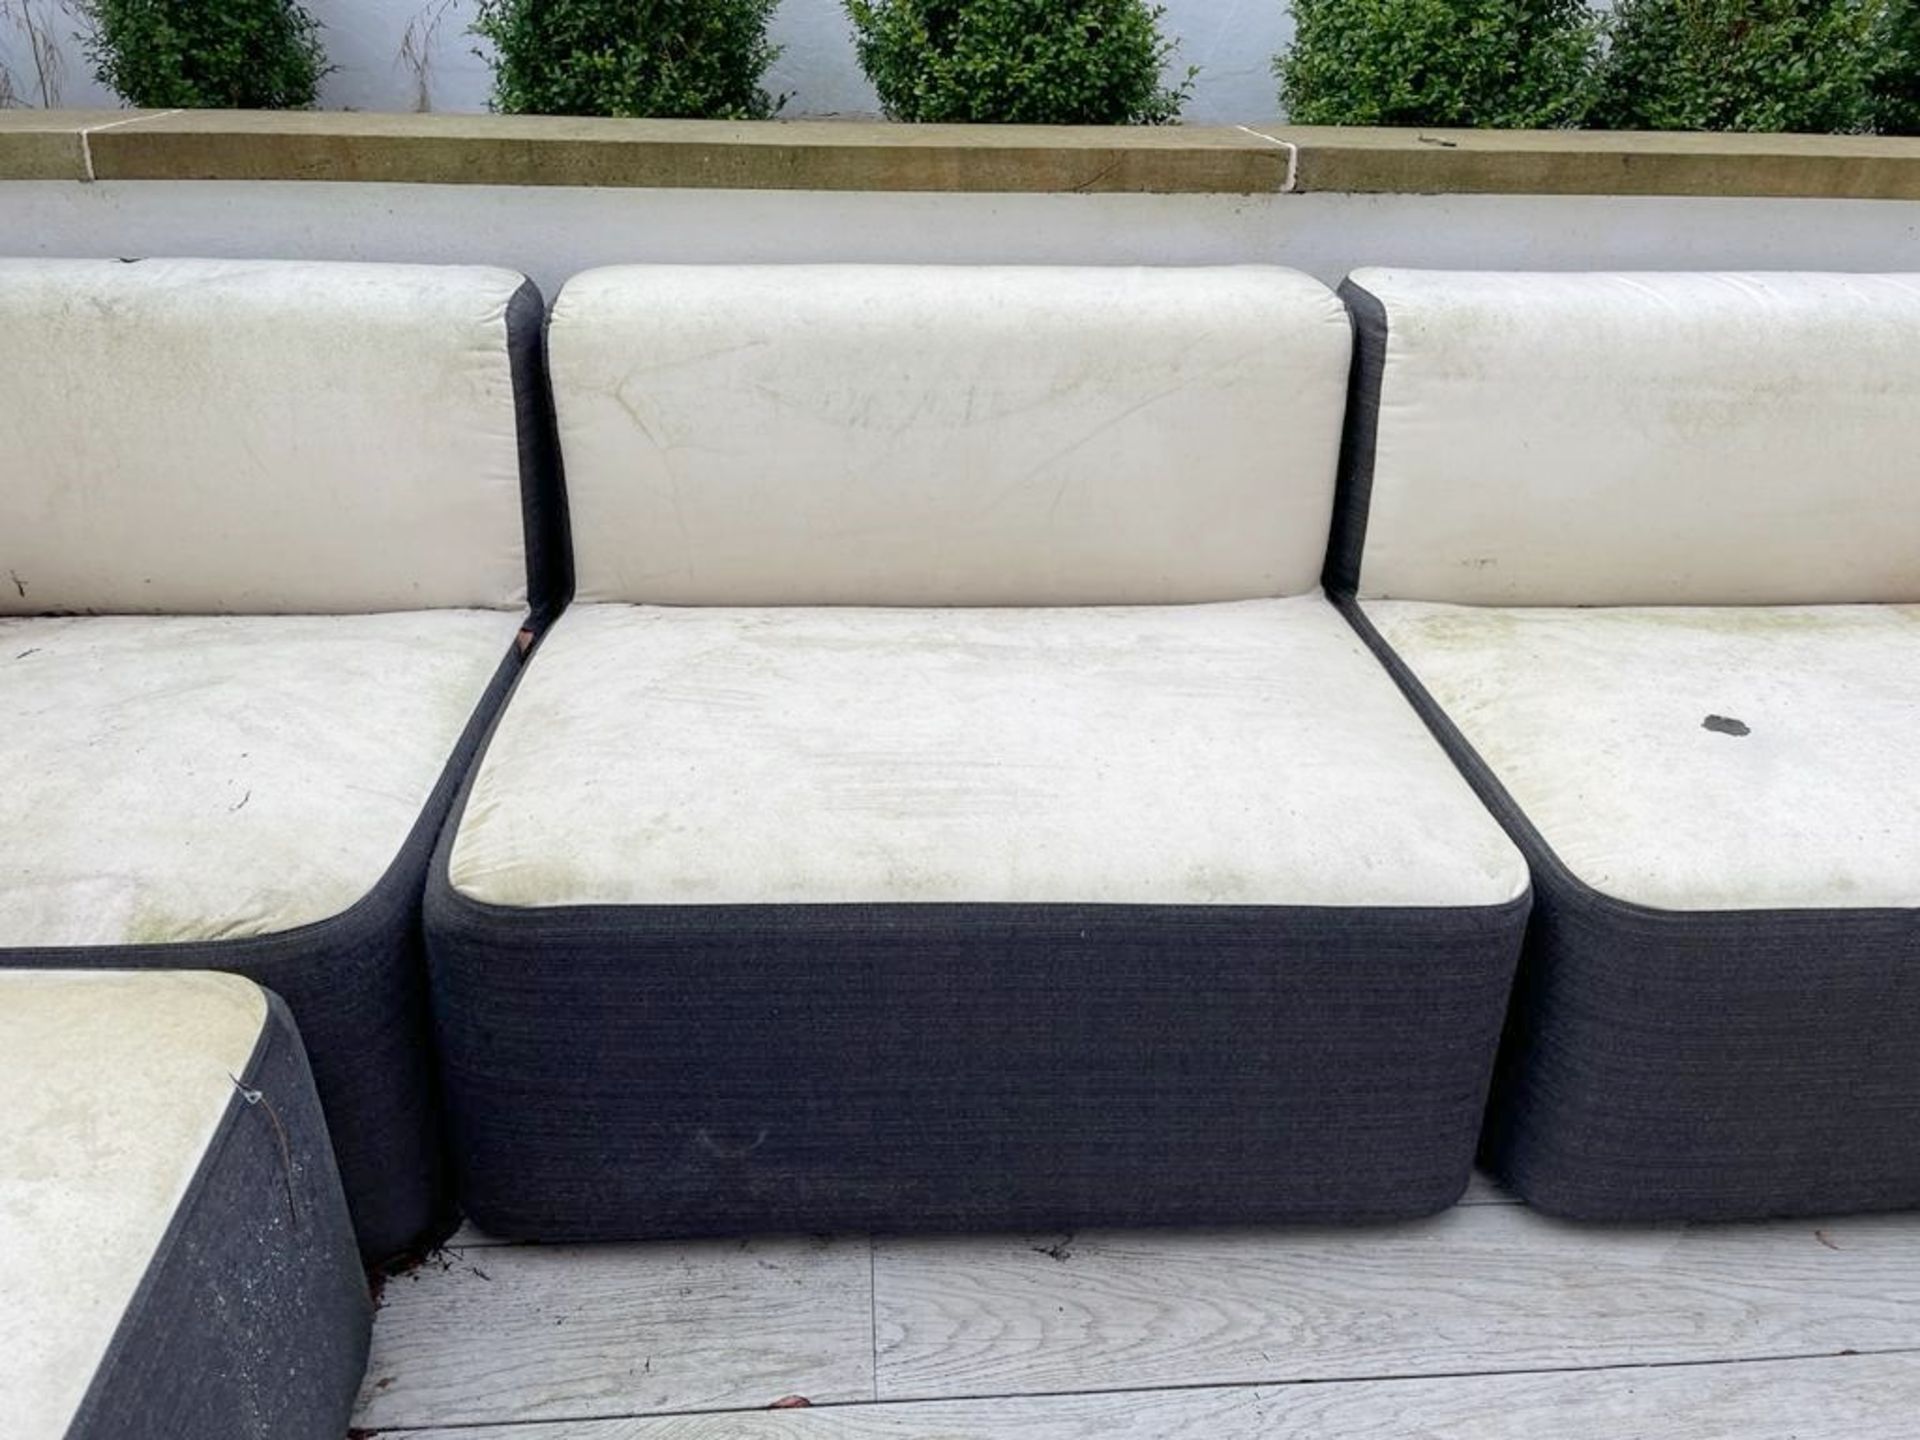 Large 7-Section VARASCHIN Modular Outdoor Corner Sofa Seating - Dimensions To Follow - From an - Image 7 of 12